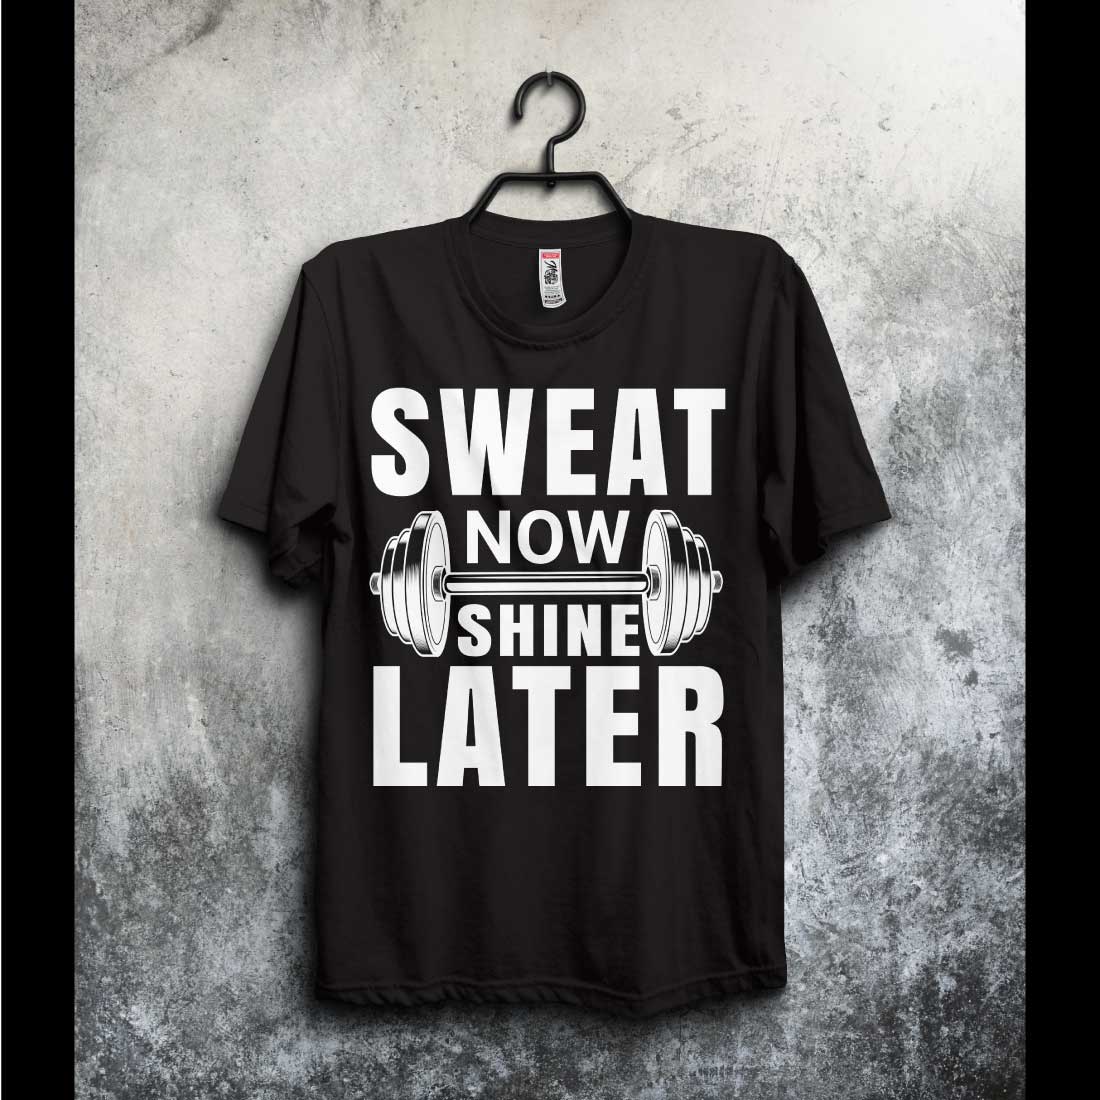 Black shirt that says sweat now shine later.